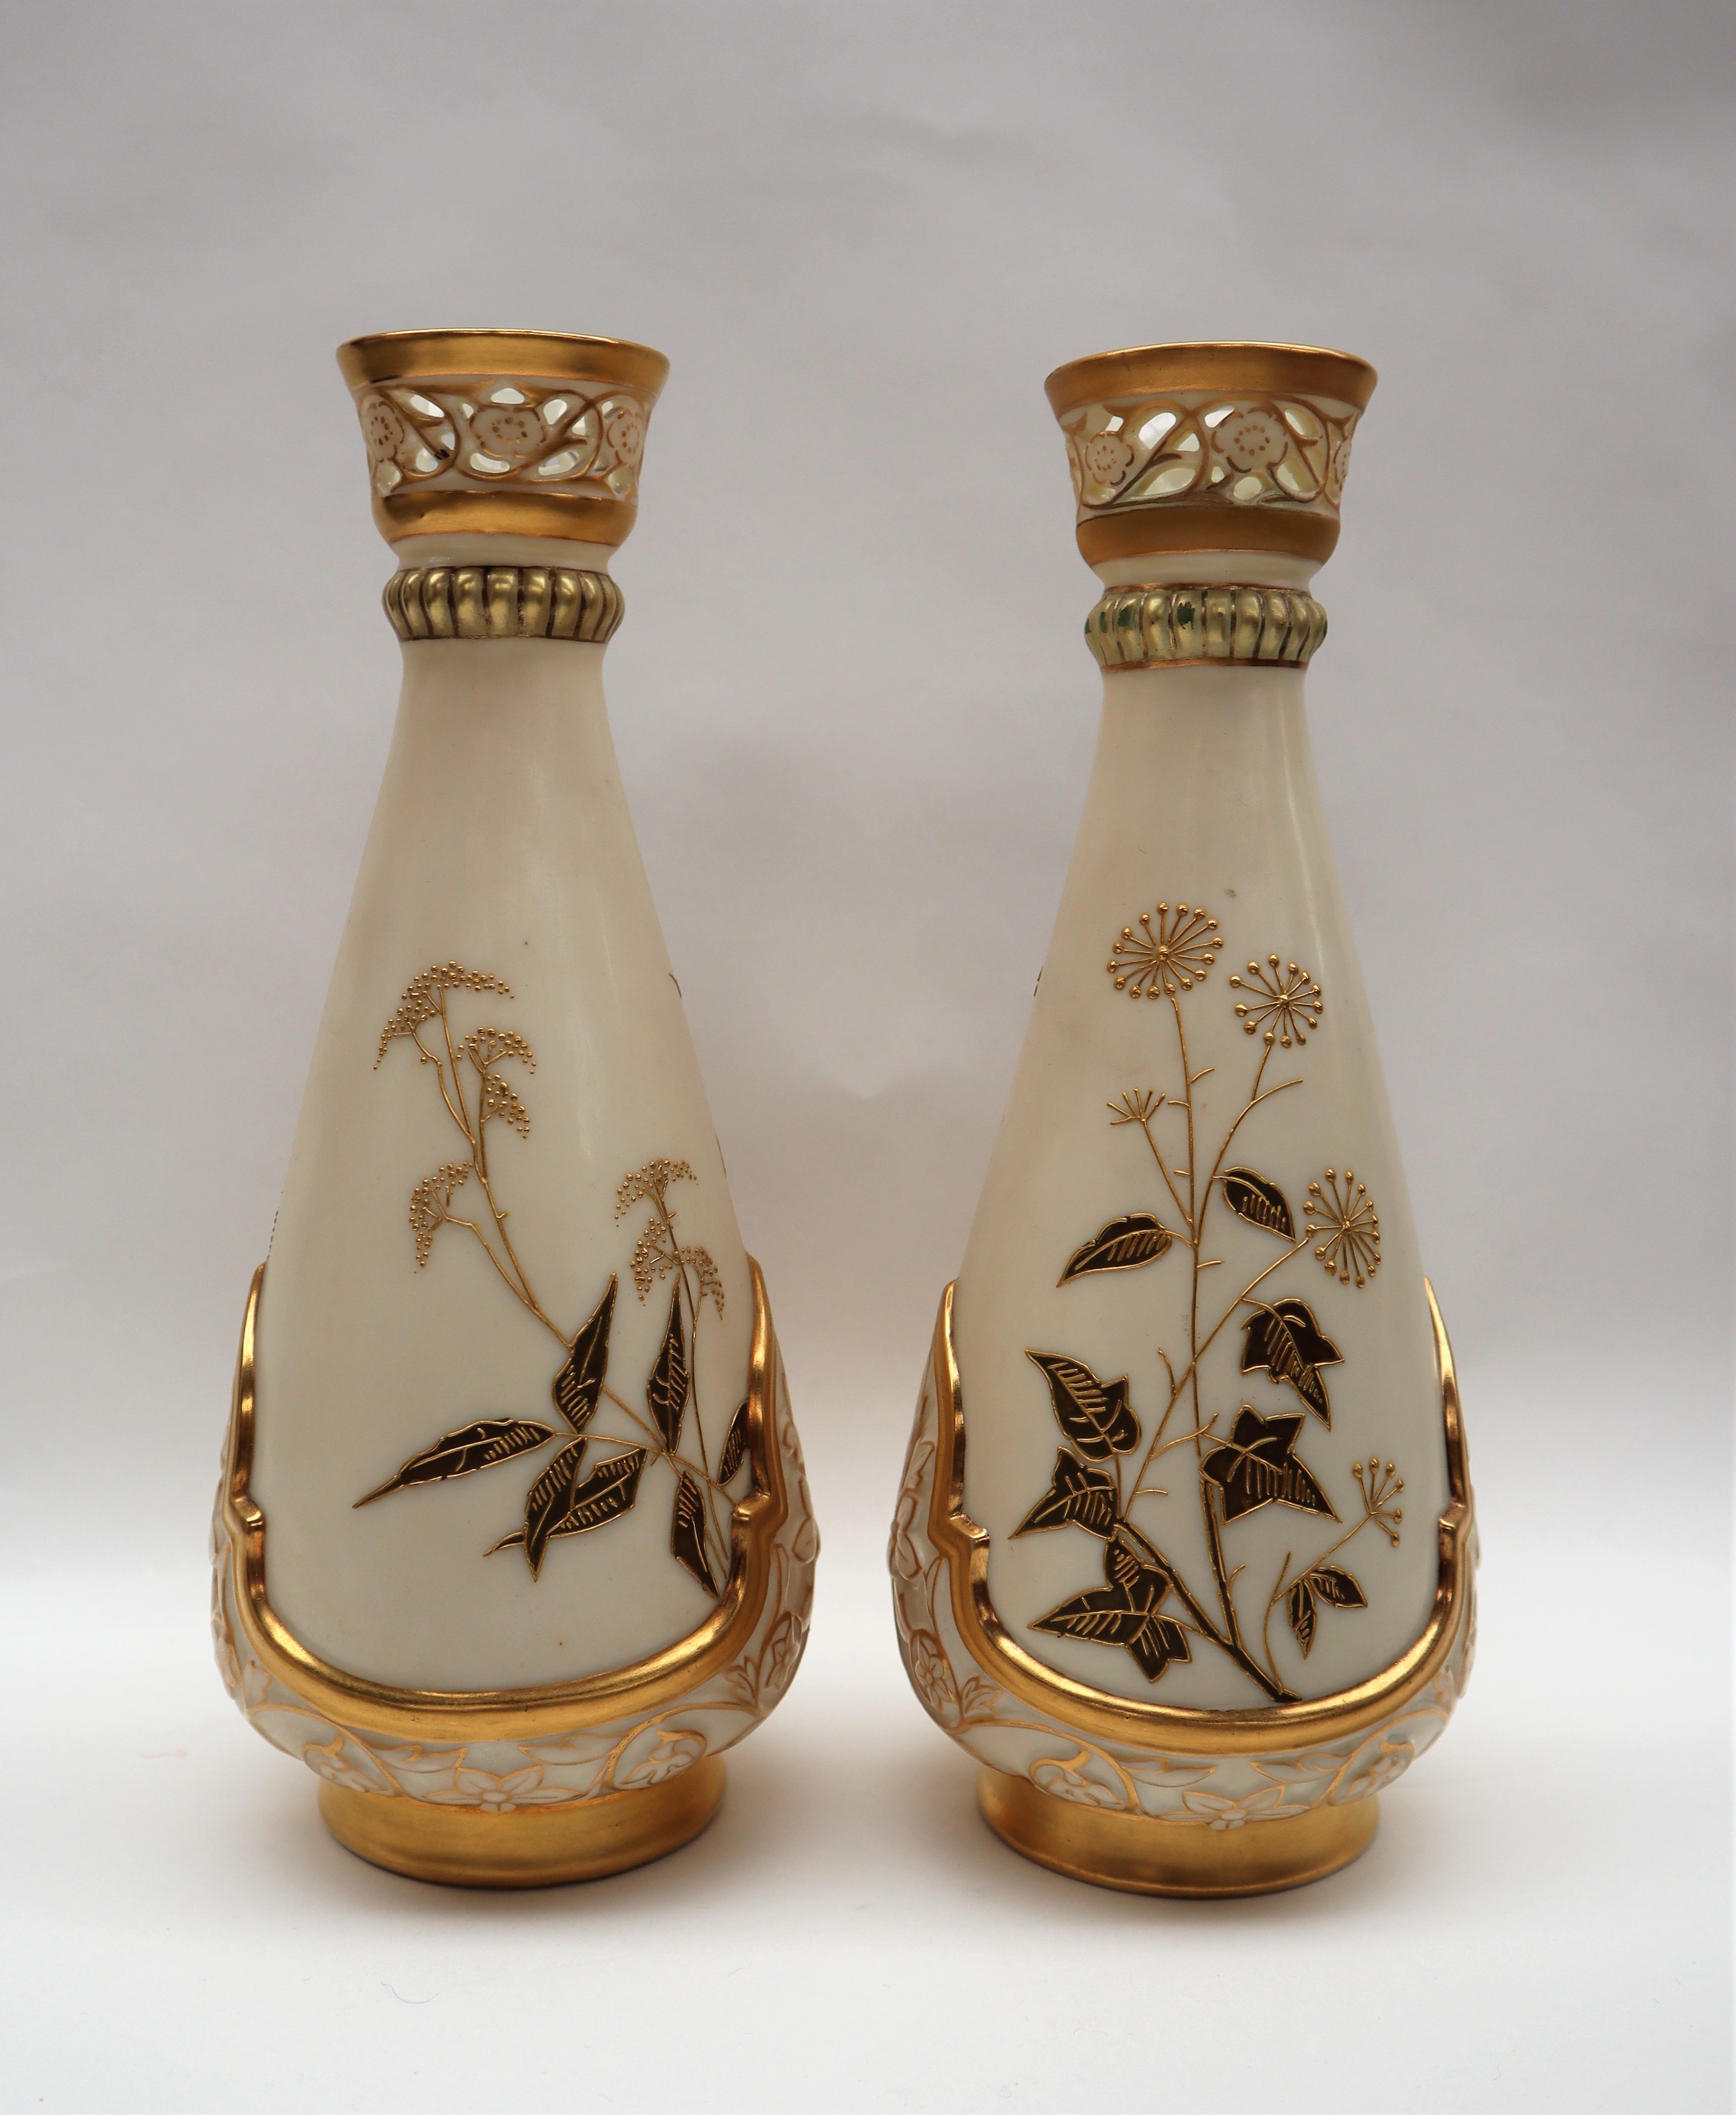 A pair of Royal Worcester porcelain vase with a pierced flared top above a tapering body decorated - Image 4 of 6